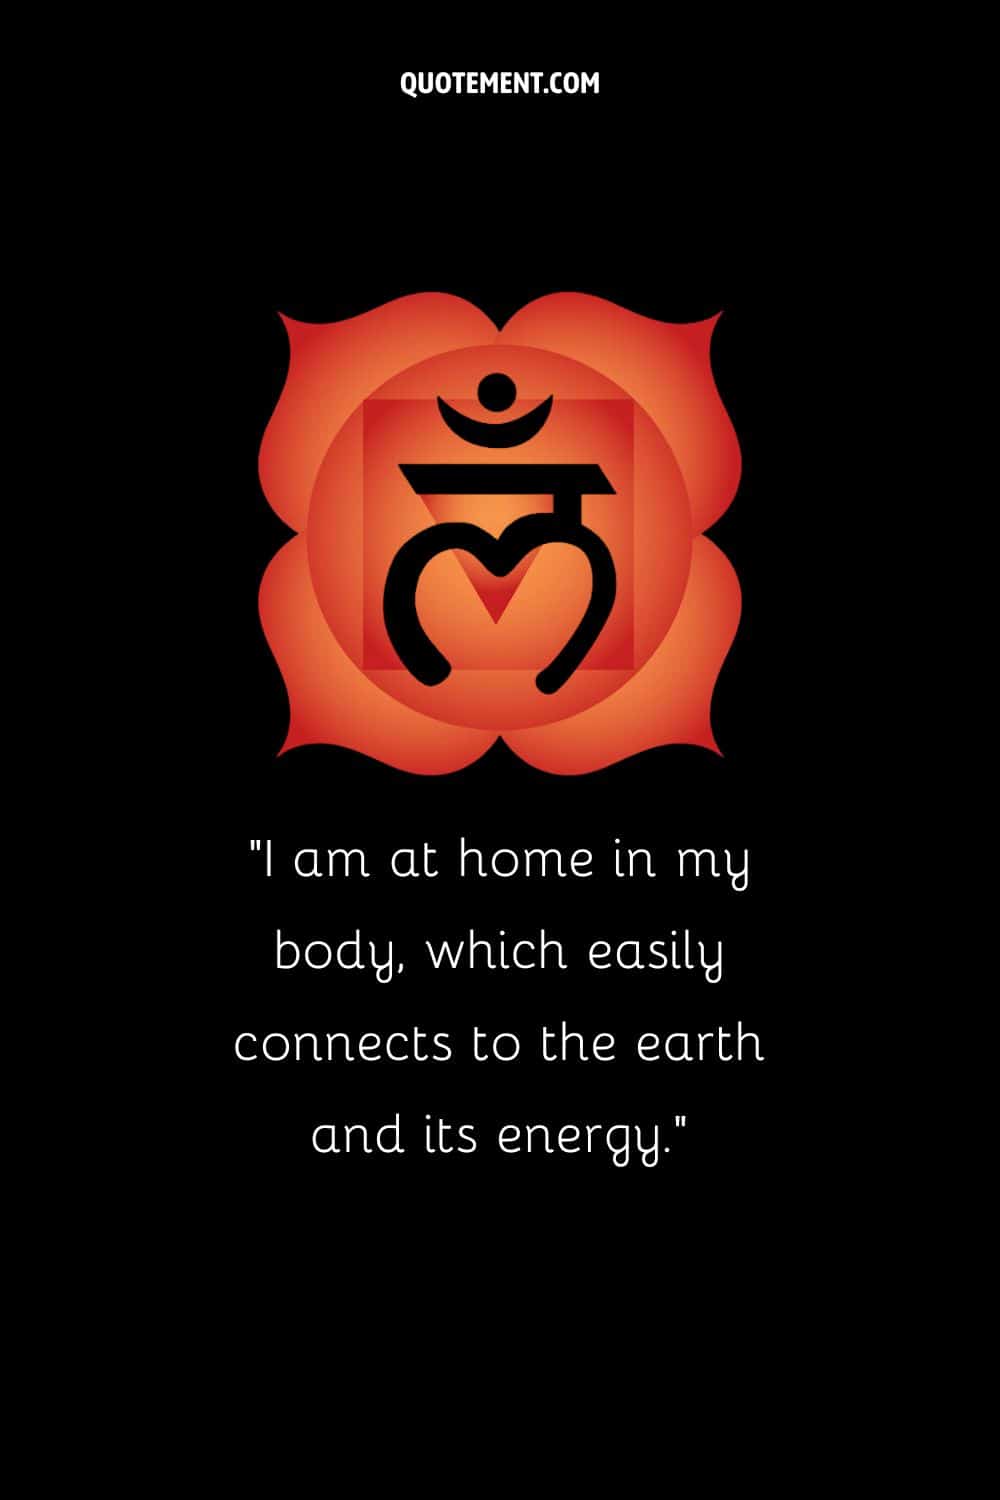 Illustration of the symbol of the root chakra representing an affirmation for reconnecting with the Earth
